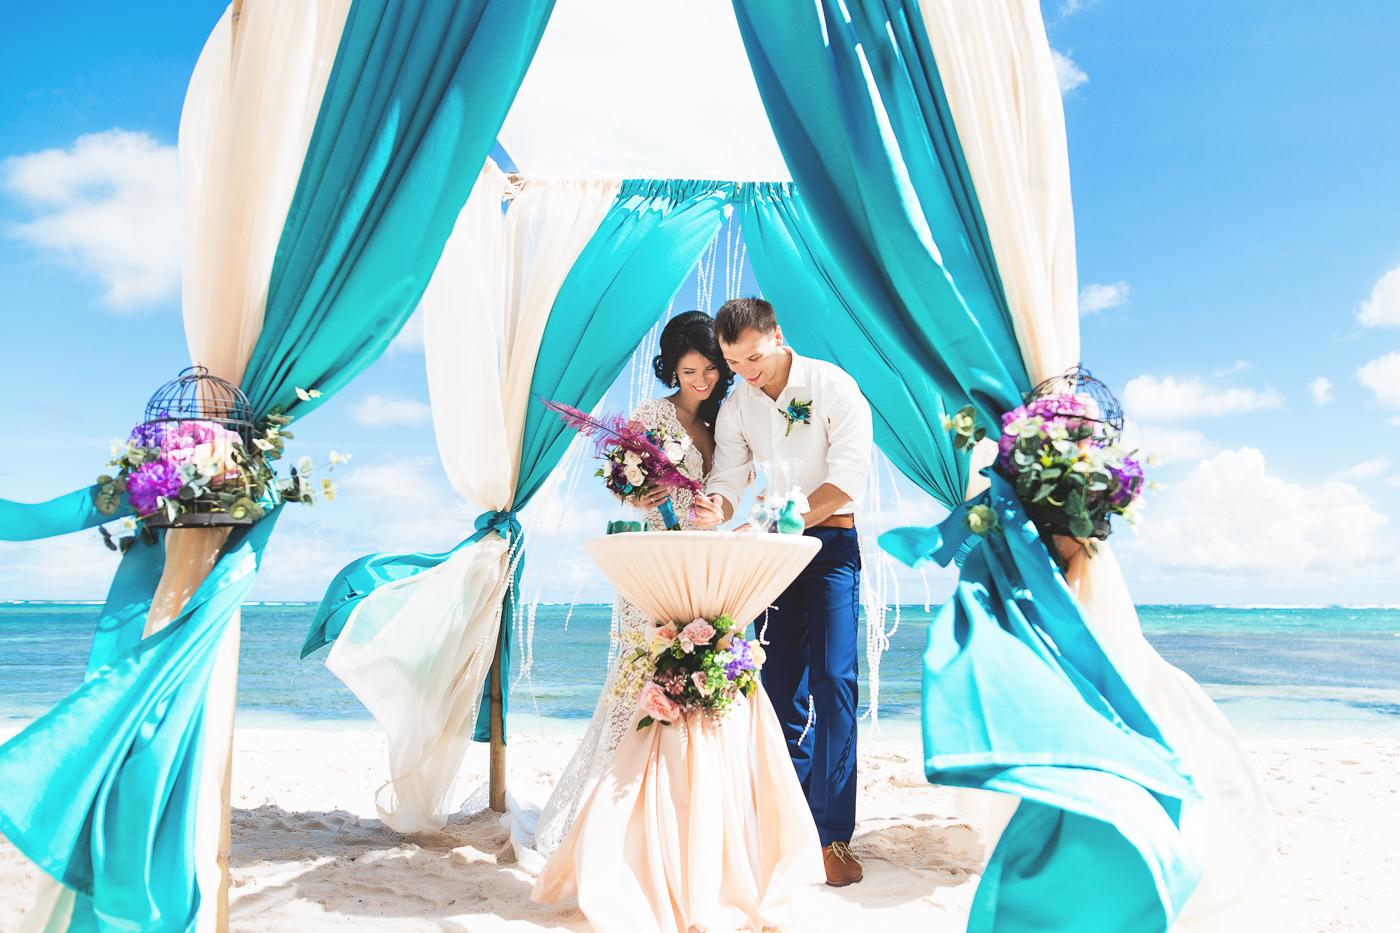 Wedding organizers abroad. How not to fall for the bait of scammers